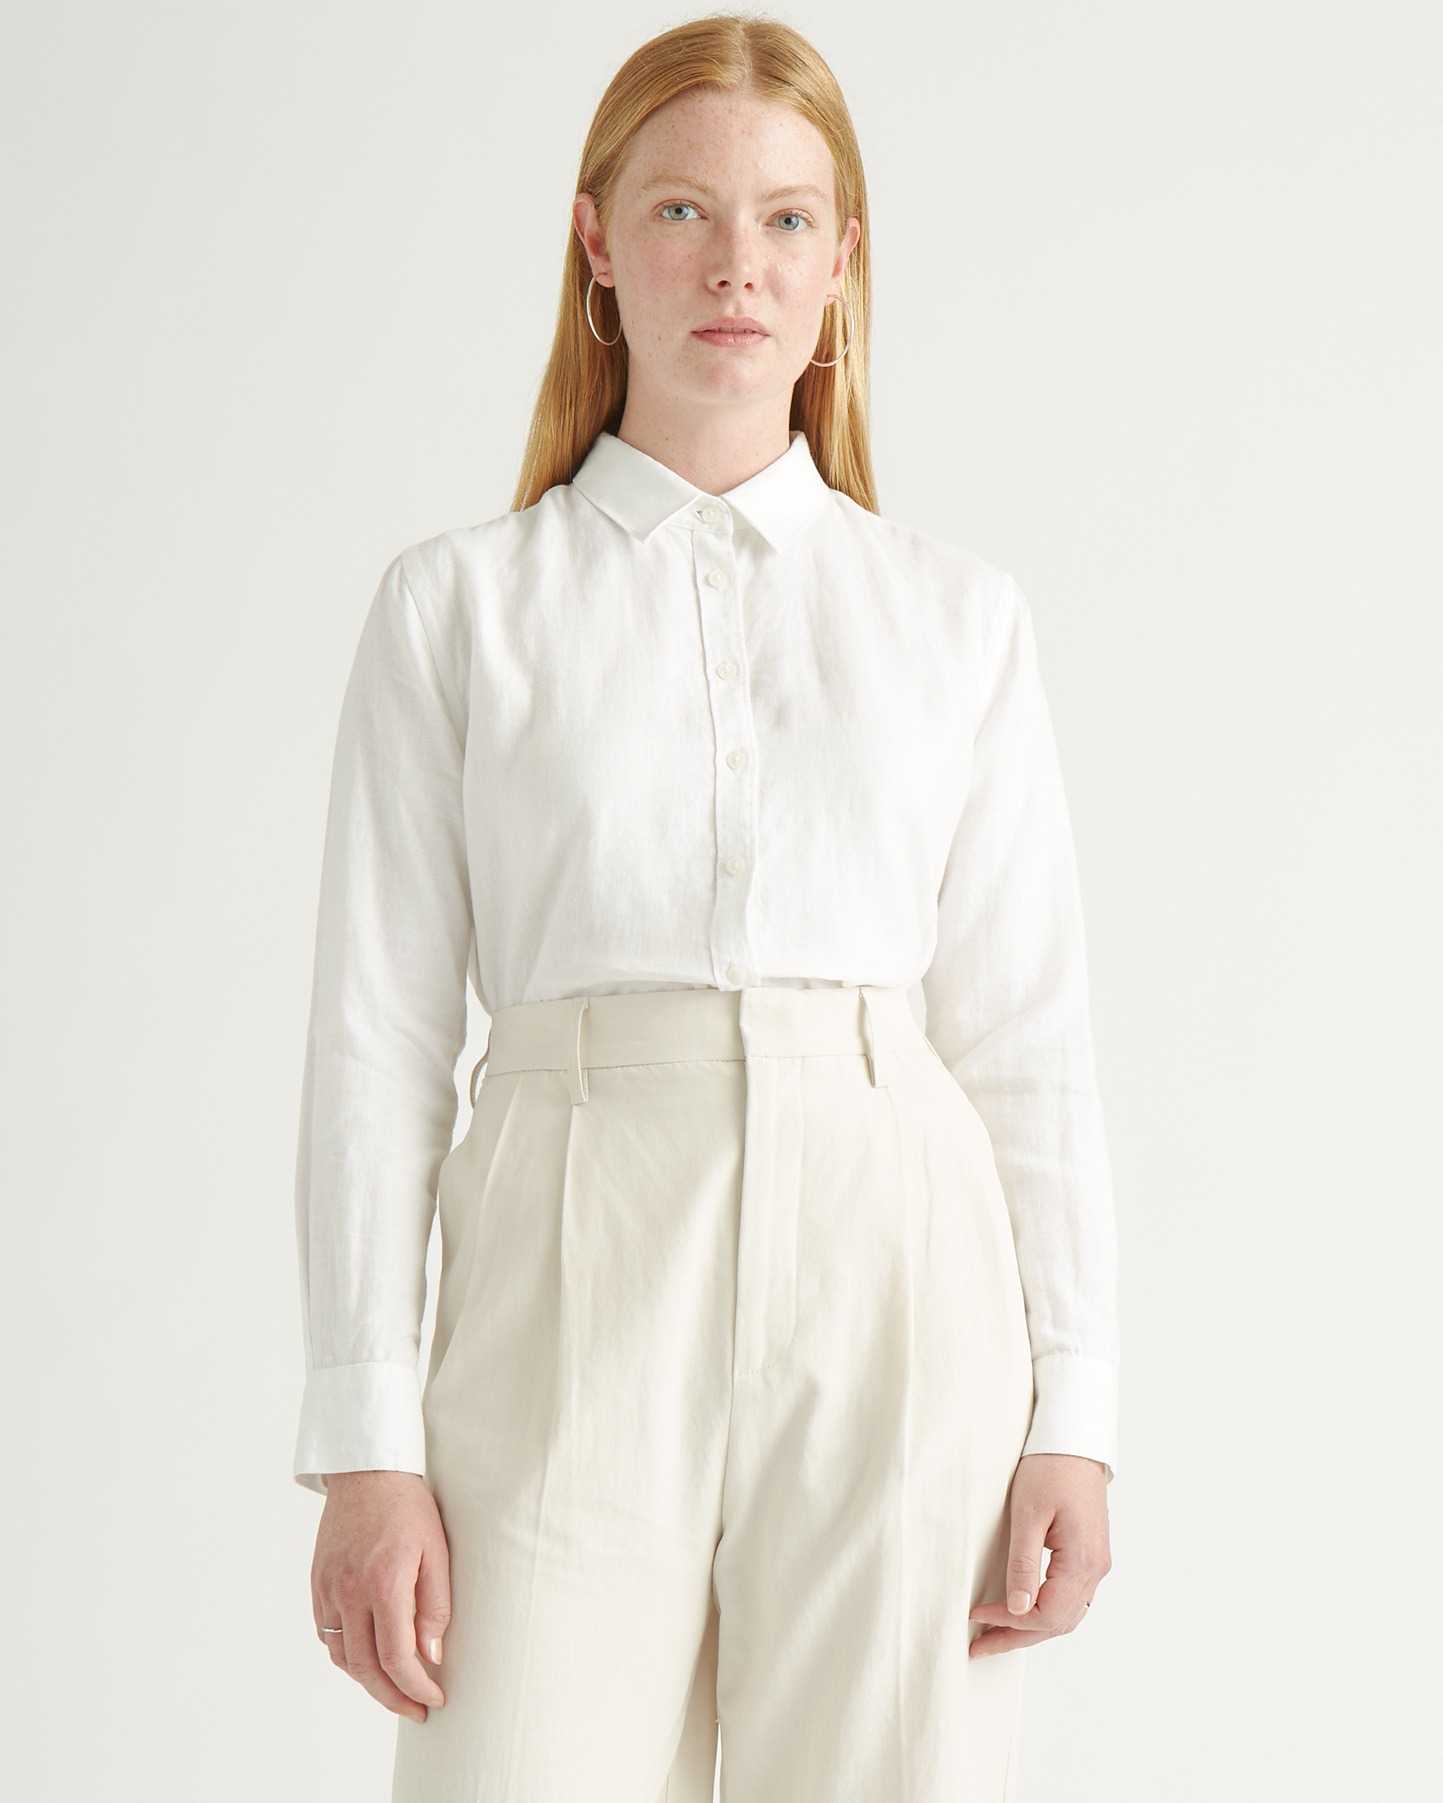 Best White Button-Down Shirts for Women: 10 Classic Options for Every Style